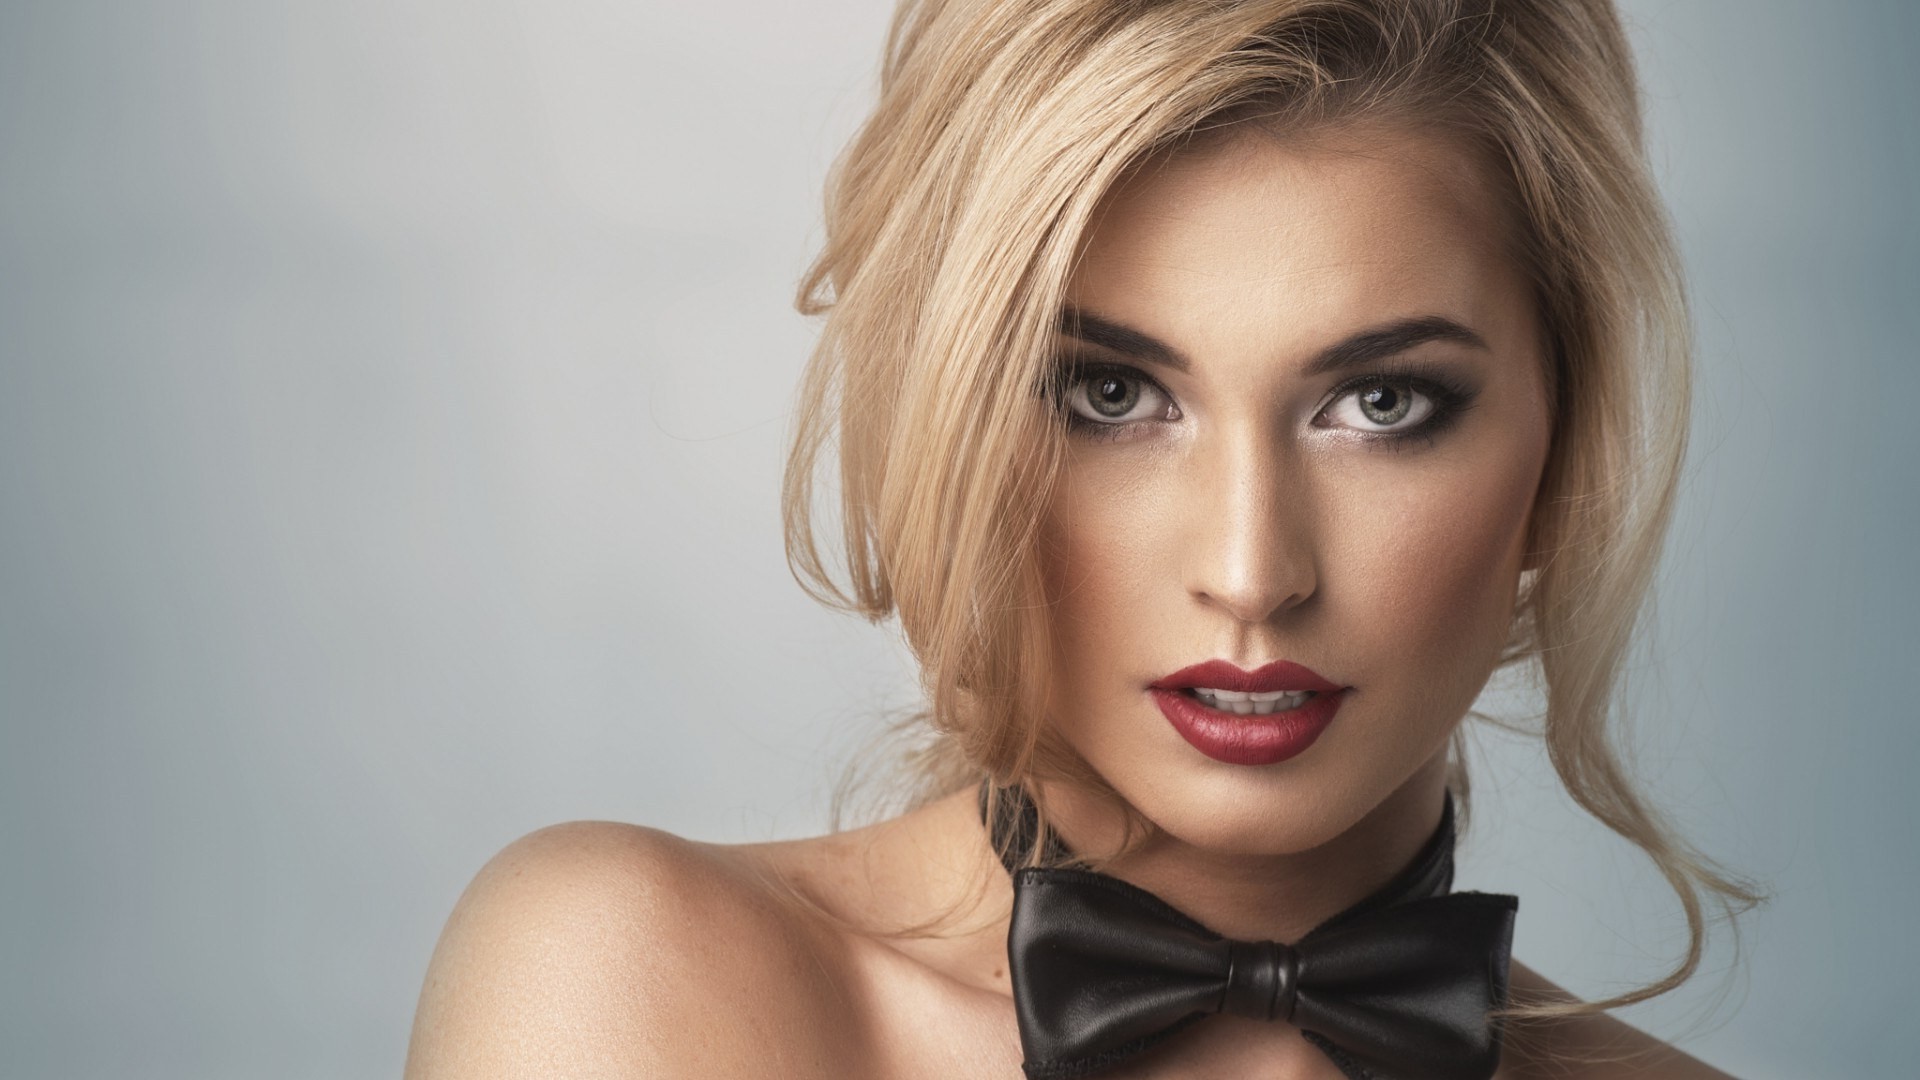 women, Model, Blonde, Long Hair, Face, Open Mouth, Bare Shoulders, Looking At Viewer, Portrait, Bow tie, Simple Background, Red Lipstick, Makeup Wallpaper